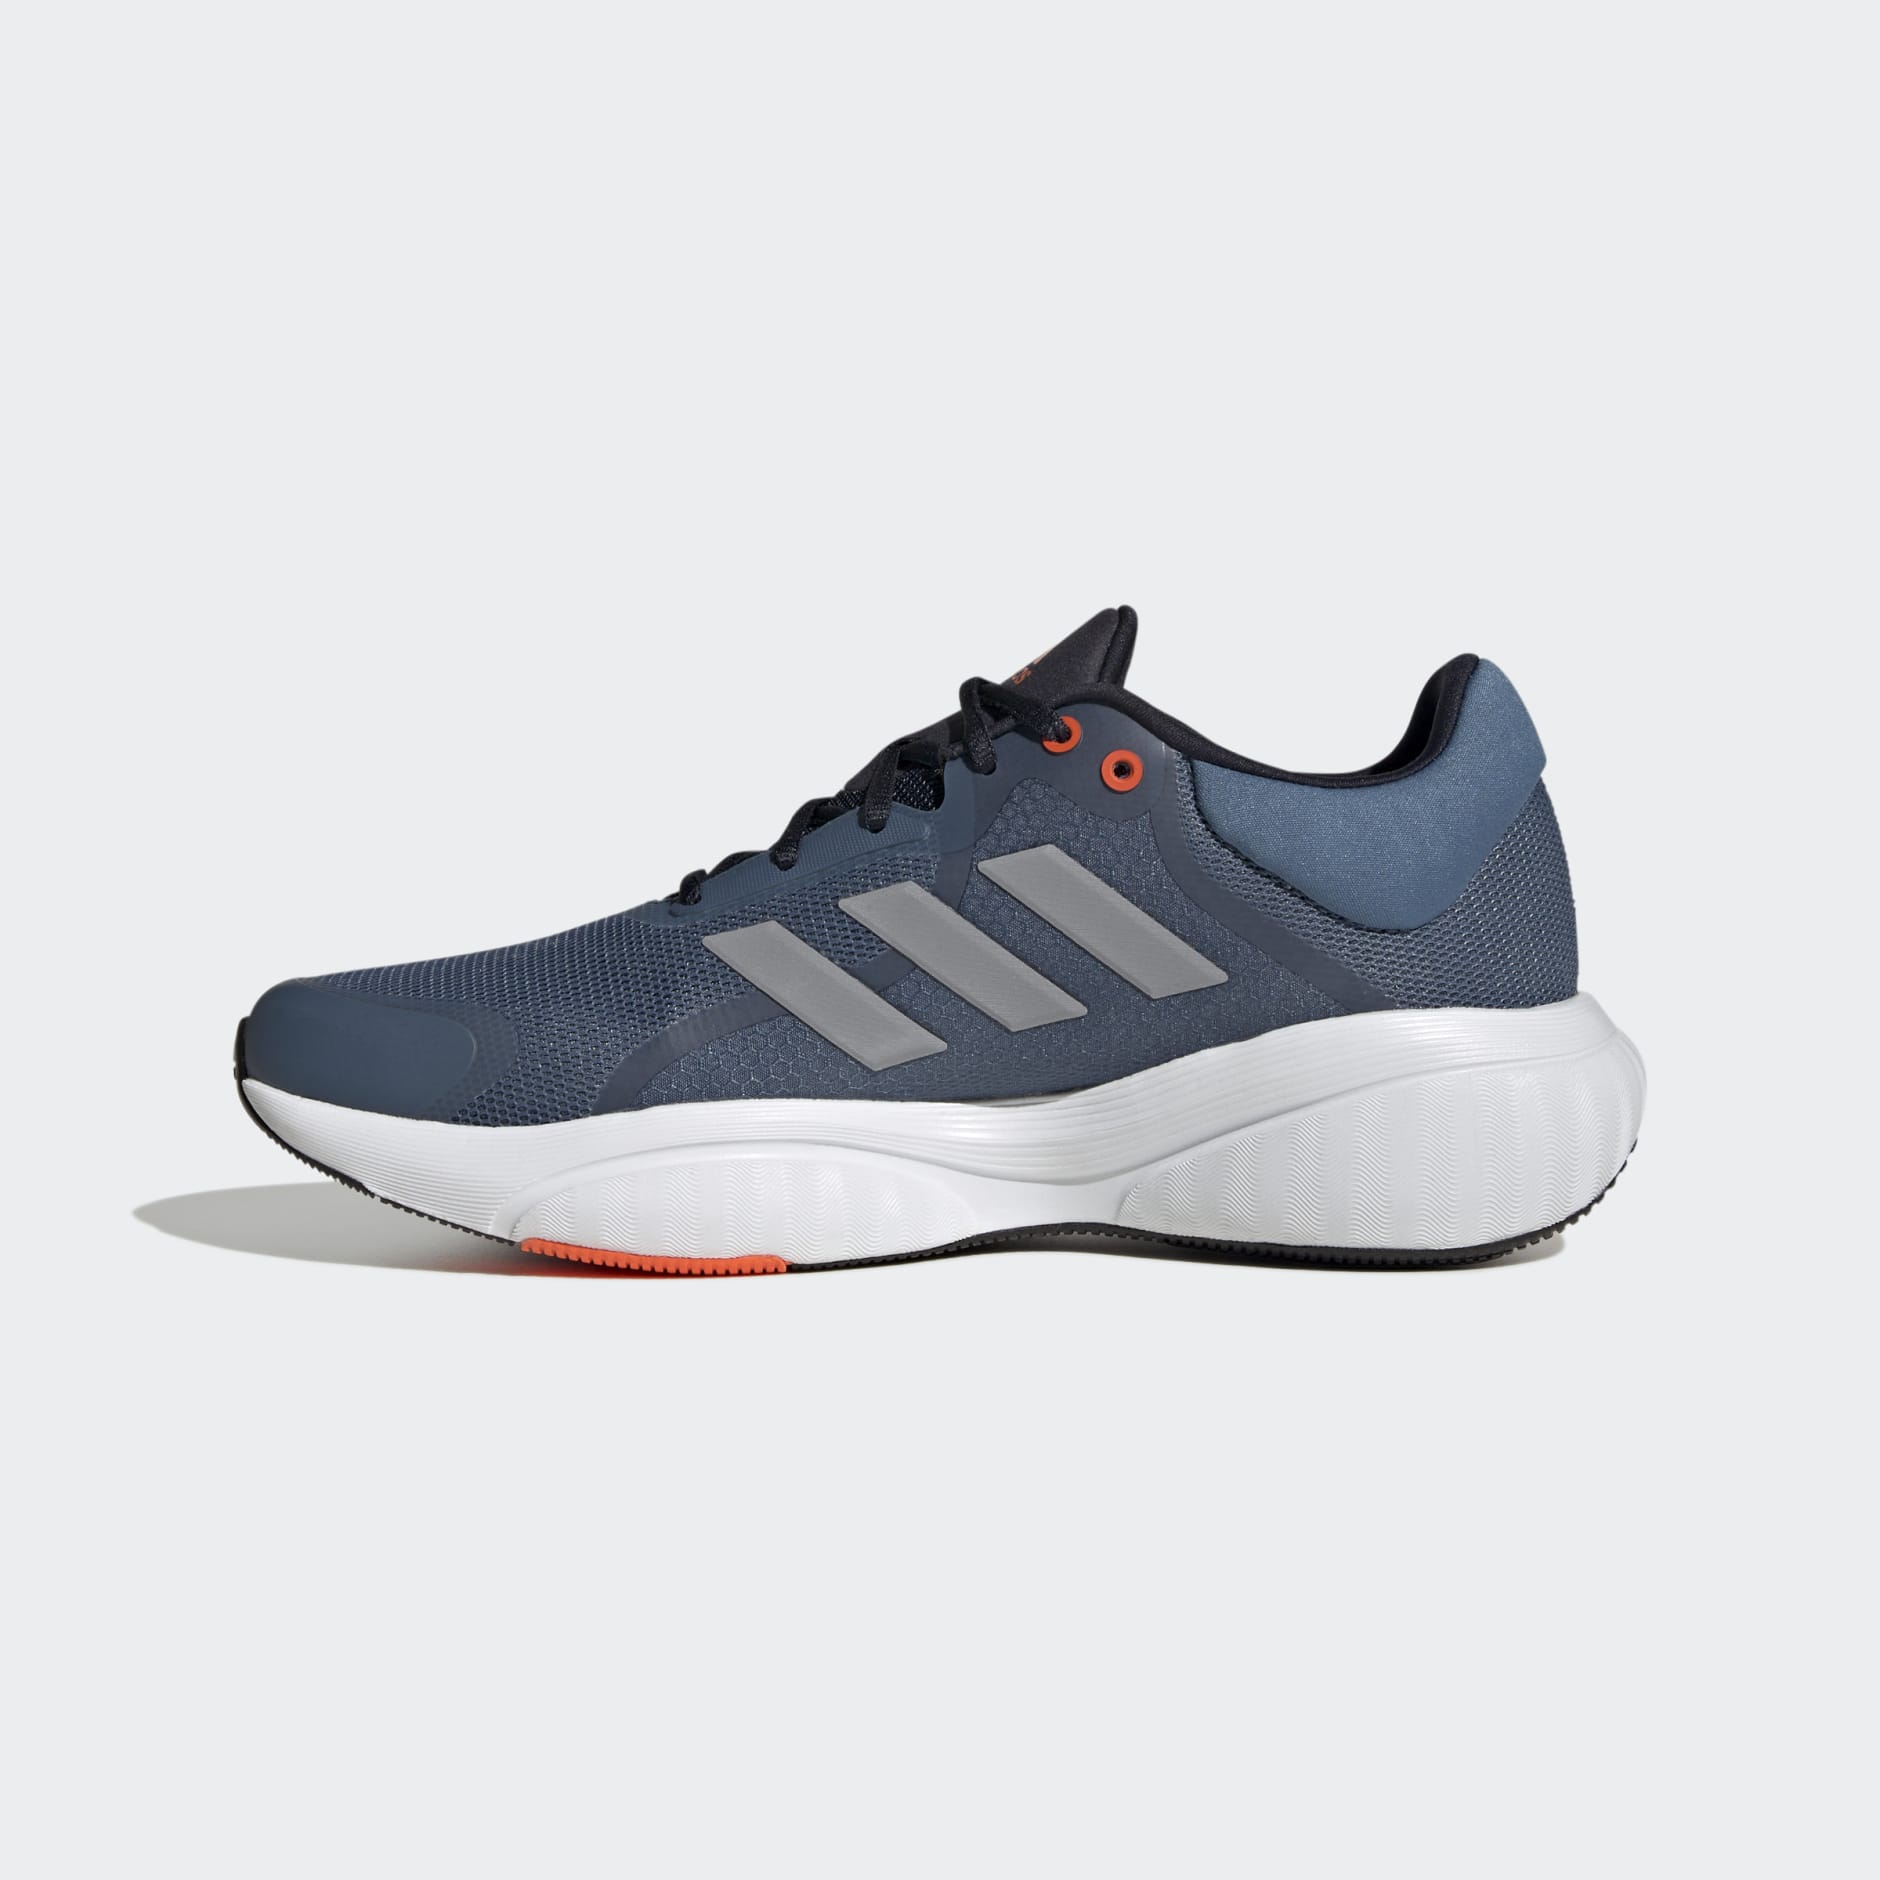 Shoes - Response Shoes - Blue | adidas South Africa